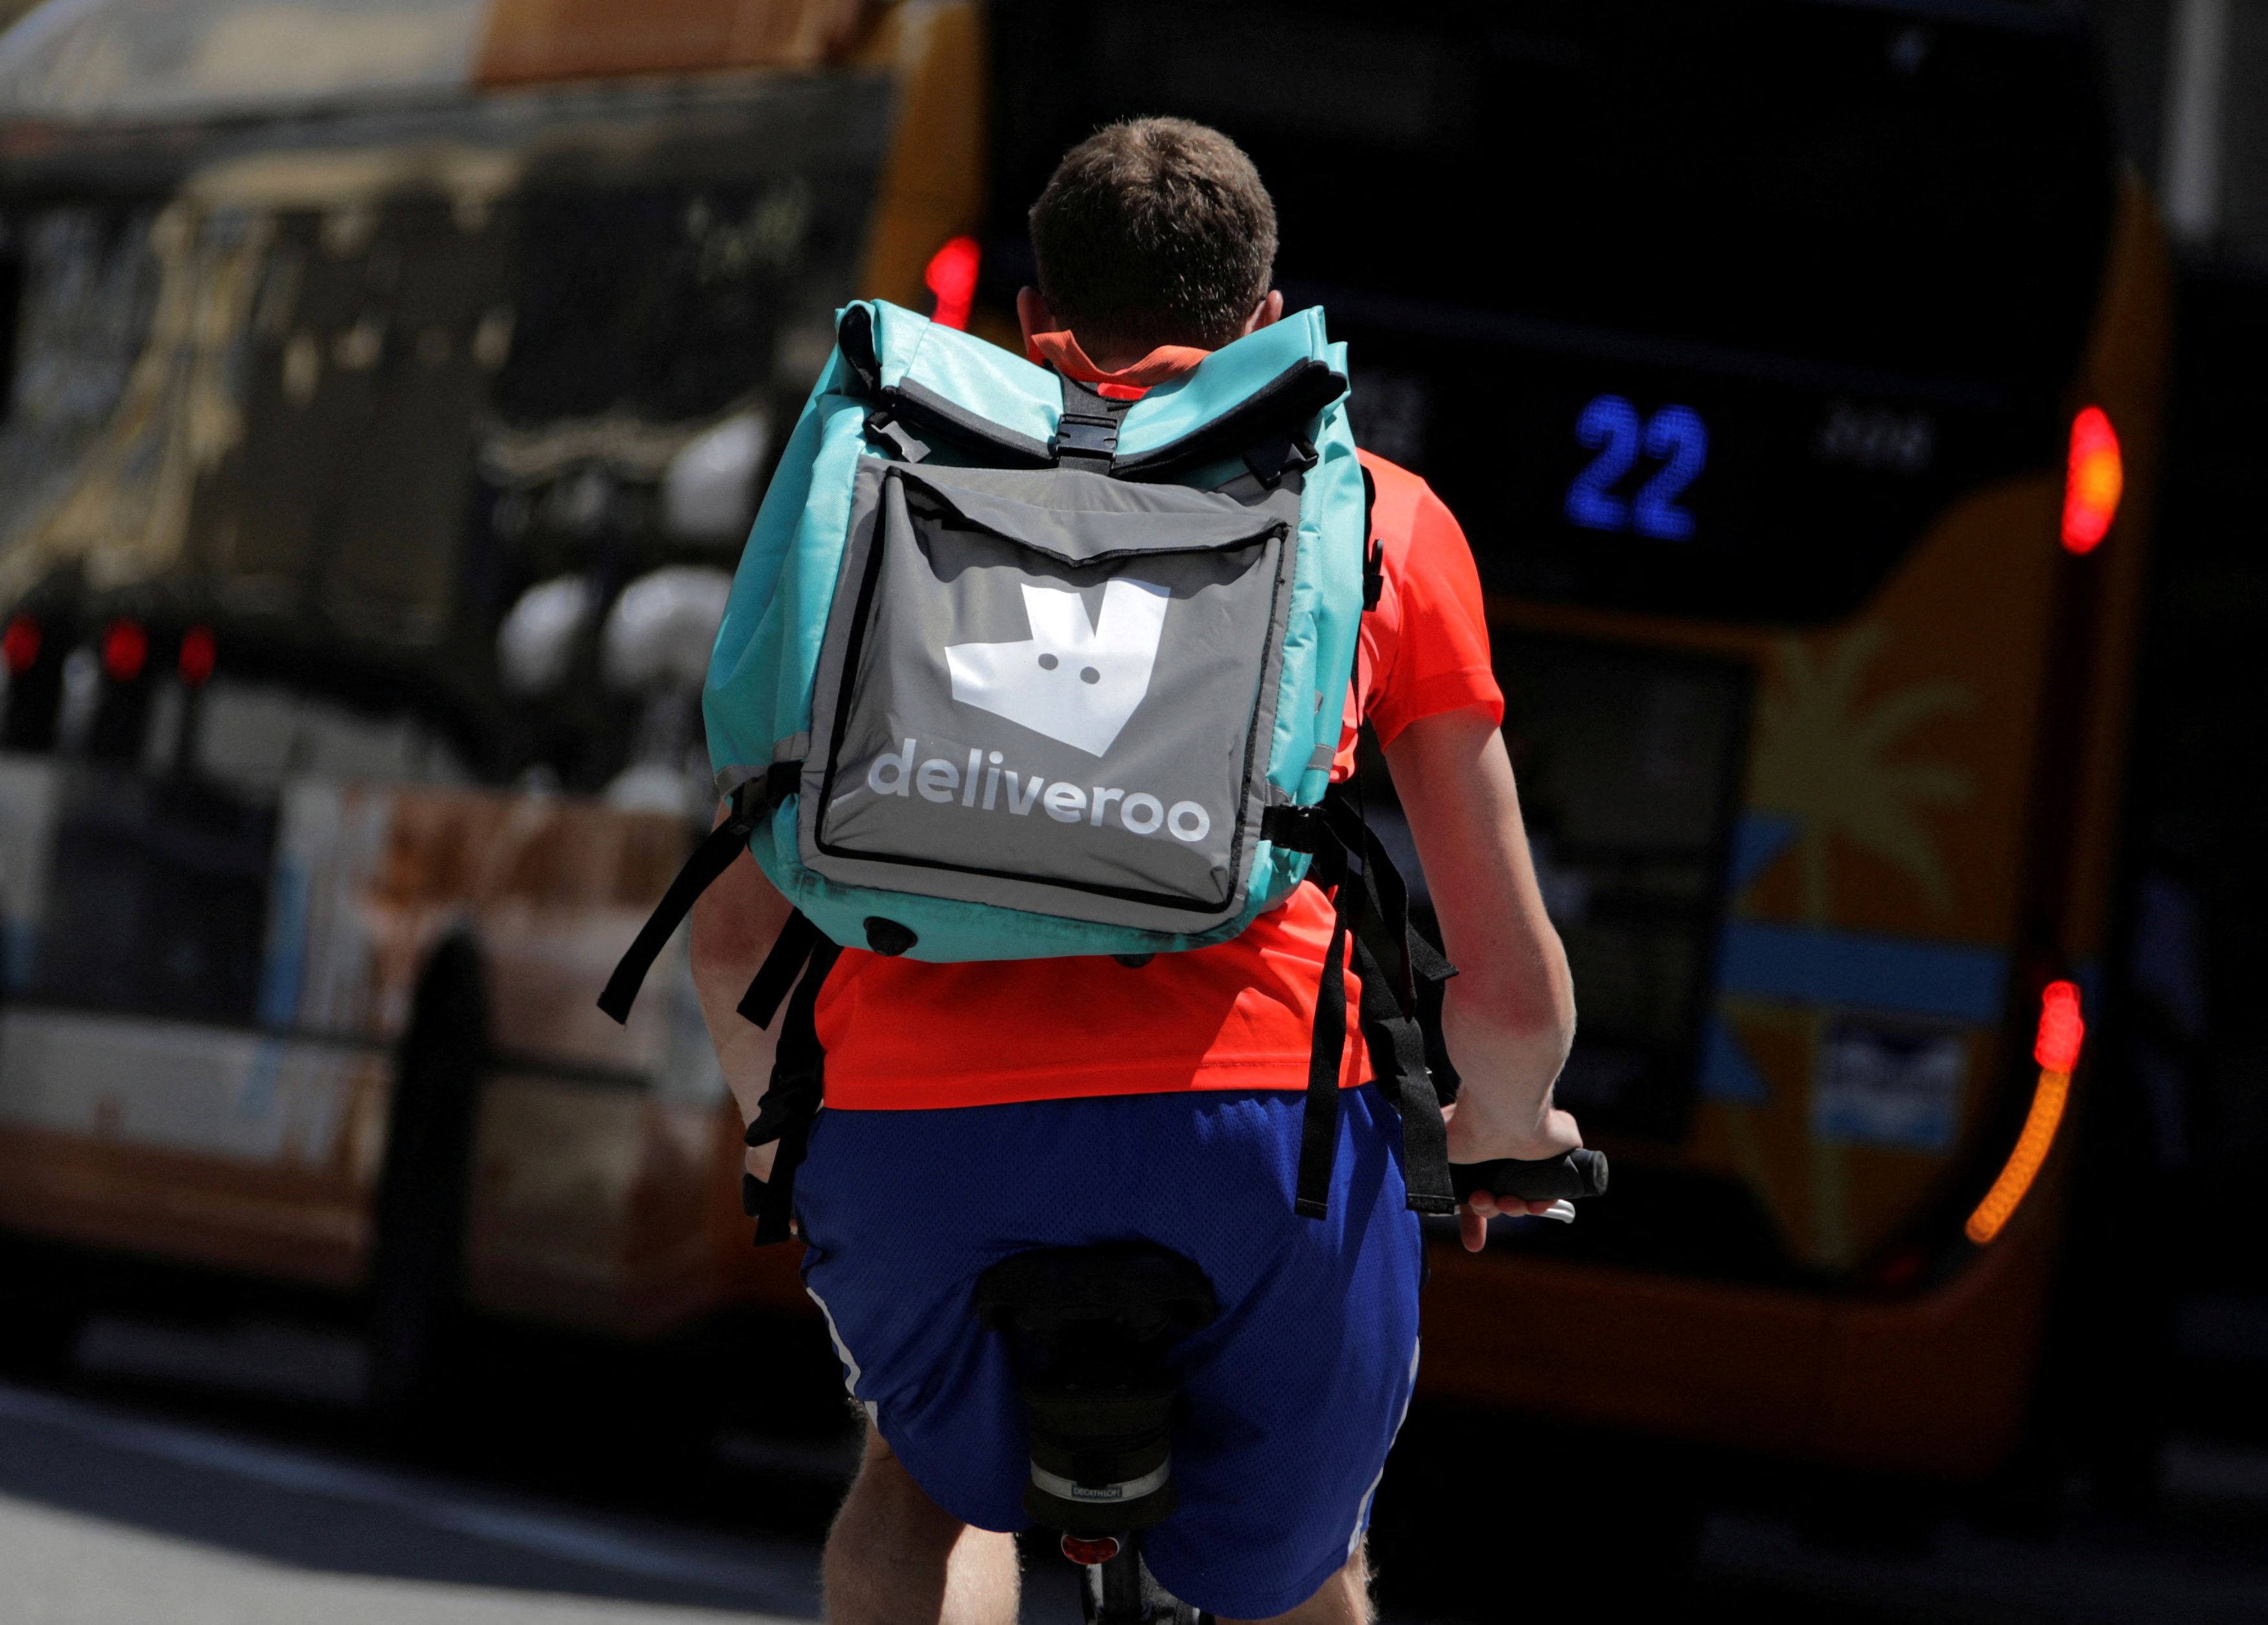 A food delivery cyclist carries a Deliveroo bag in Nice